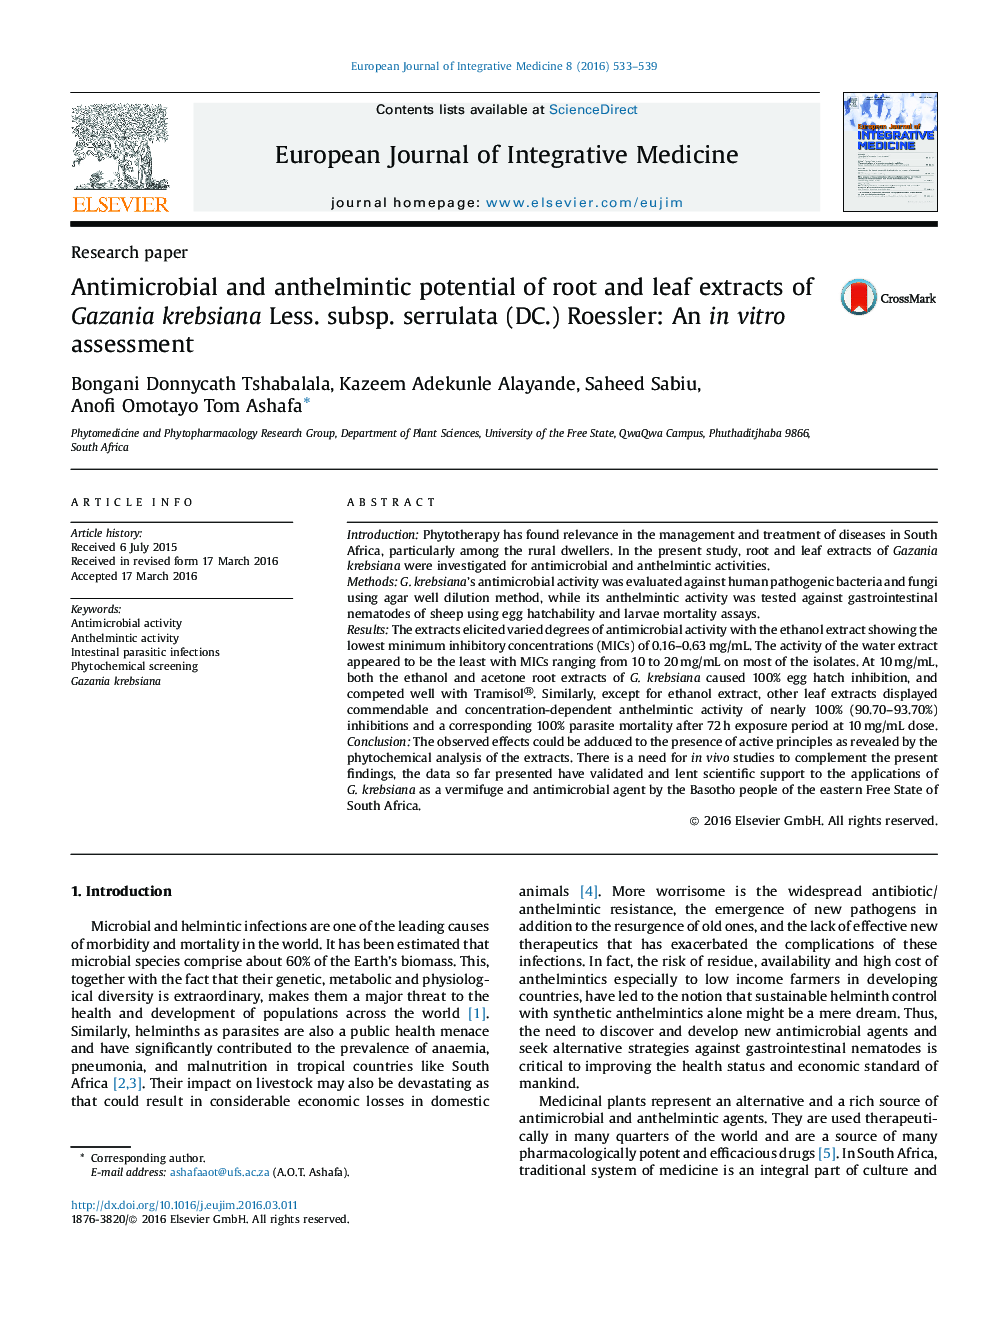 Antimicrobial and anthelmintic potential of root and leaf extracts of Gazania krebsiana Less. subsp. serrulata (DC.) Roessler: An in vitro assessment